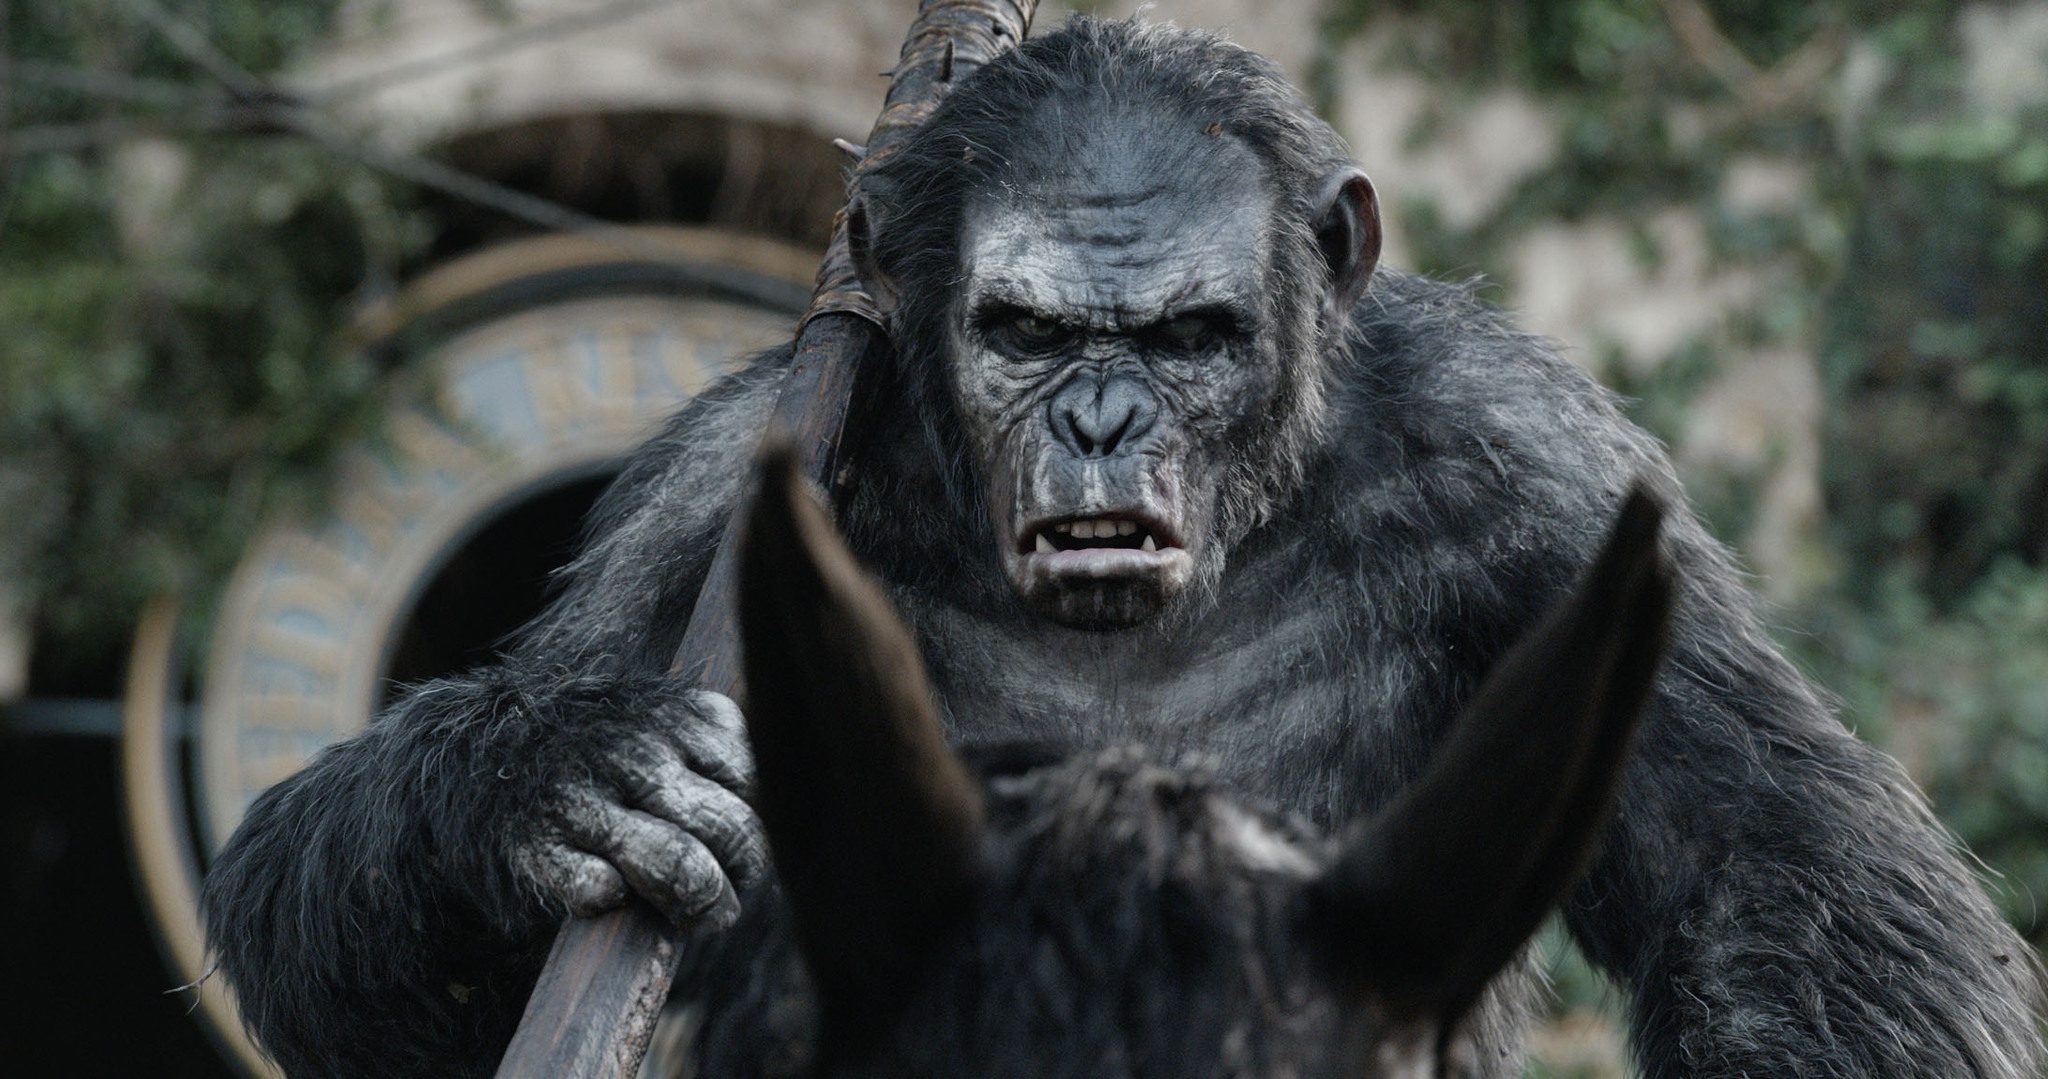 A still from the movie "Dawn of the planet of the apes"